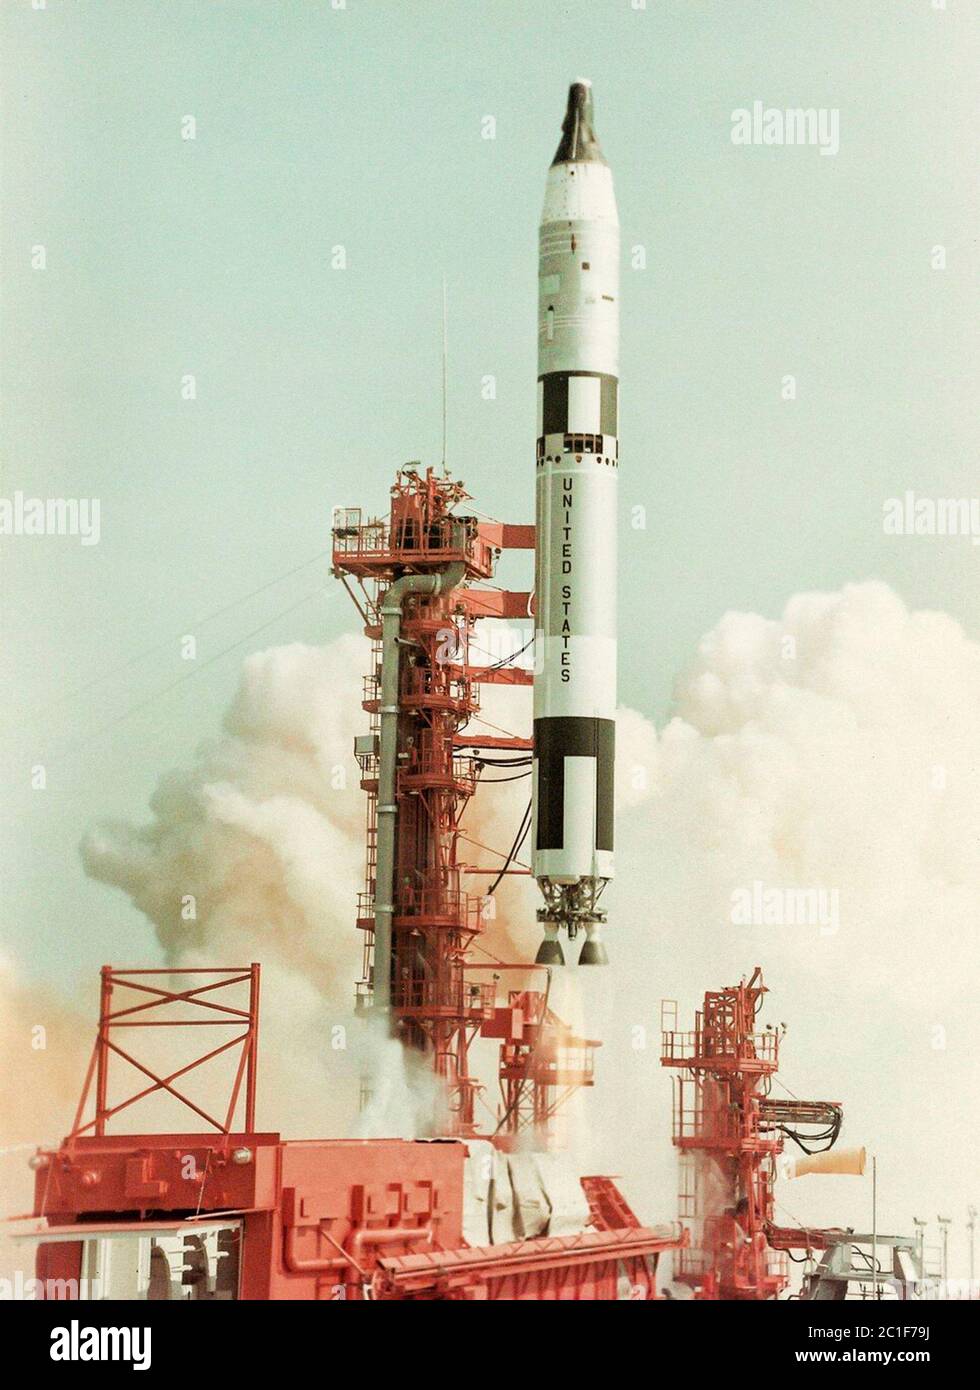 The Launch of 'Gemini 8'. The main task of the flight is to approach and dock with the Agena-VIII target. Secondary tasks included checking the ship's Stock Photo